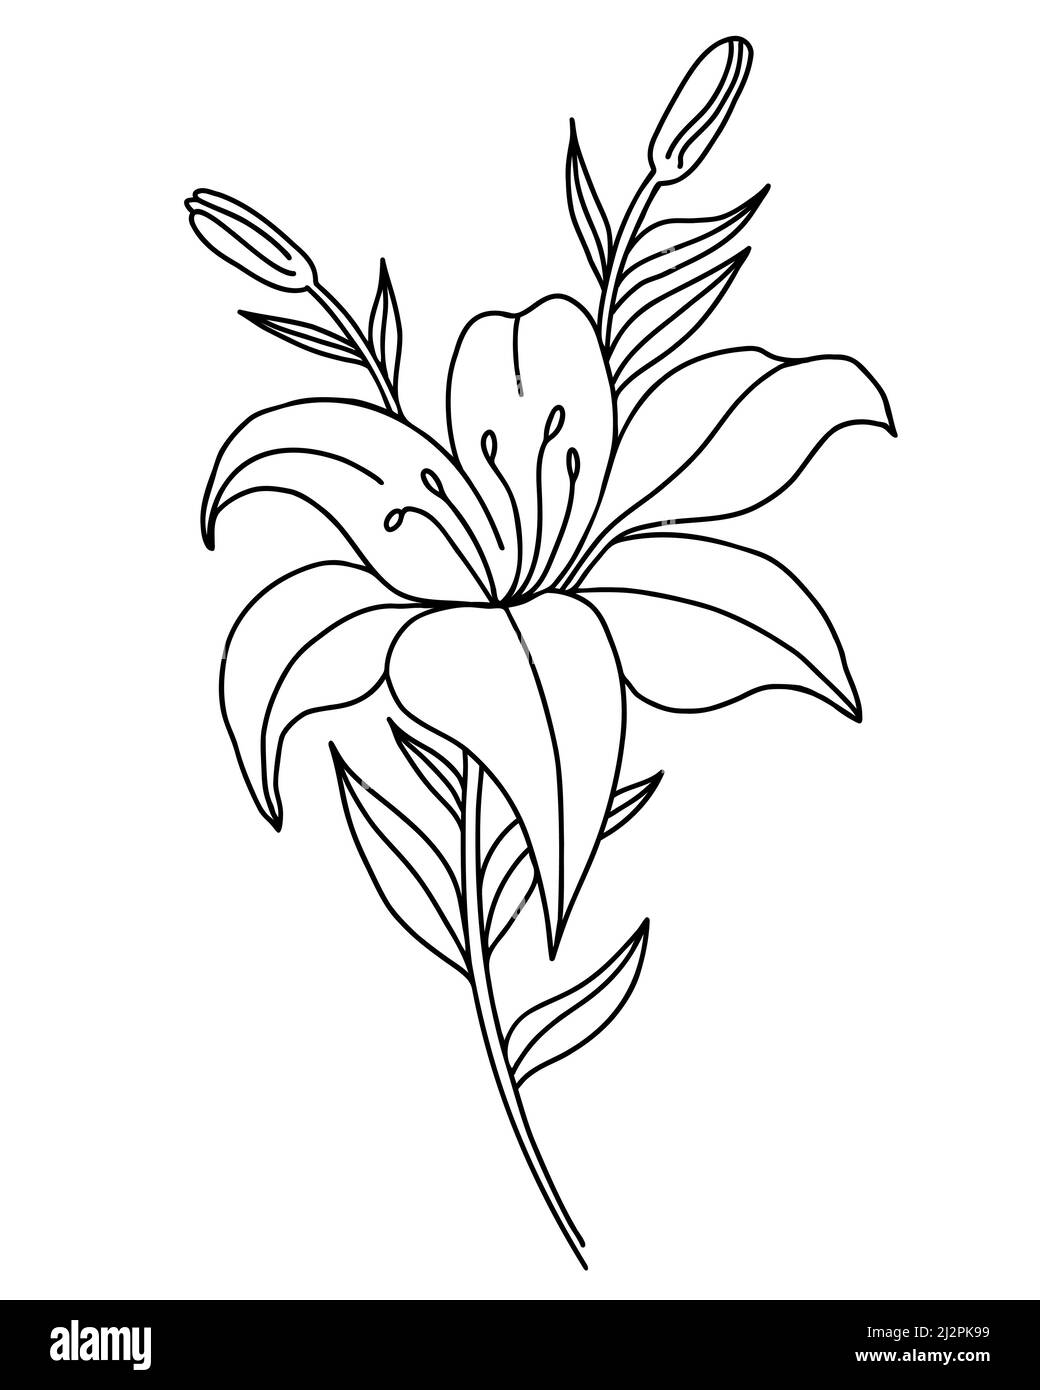 Black outline of lily flowers. Branch with flowers and buds. Vector illustration isolated on white background. Ornamental plant for design, decor, dec Stock Vector